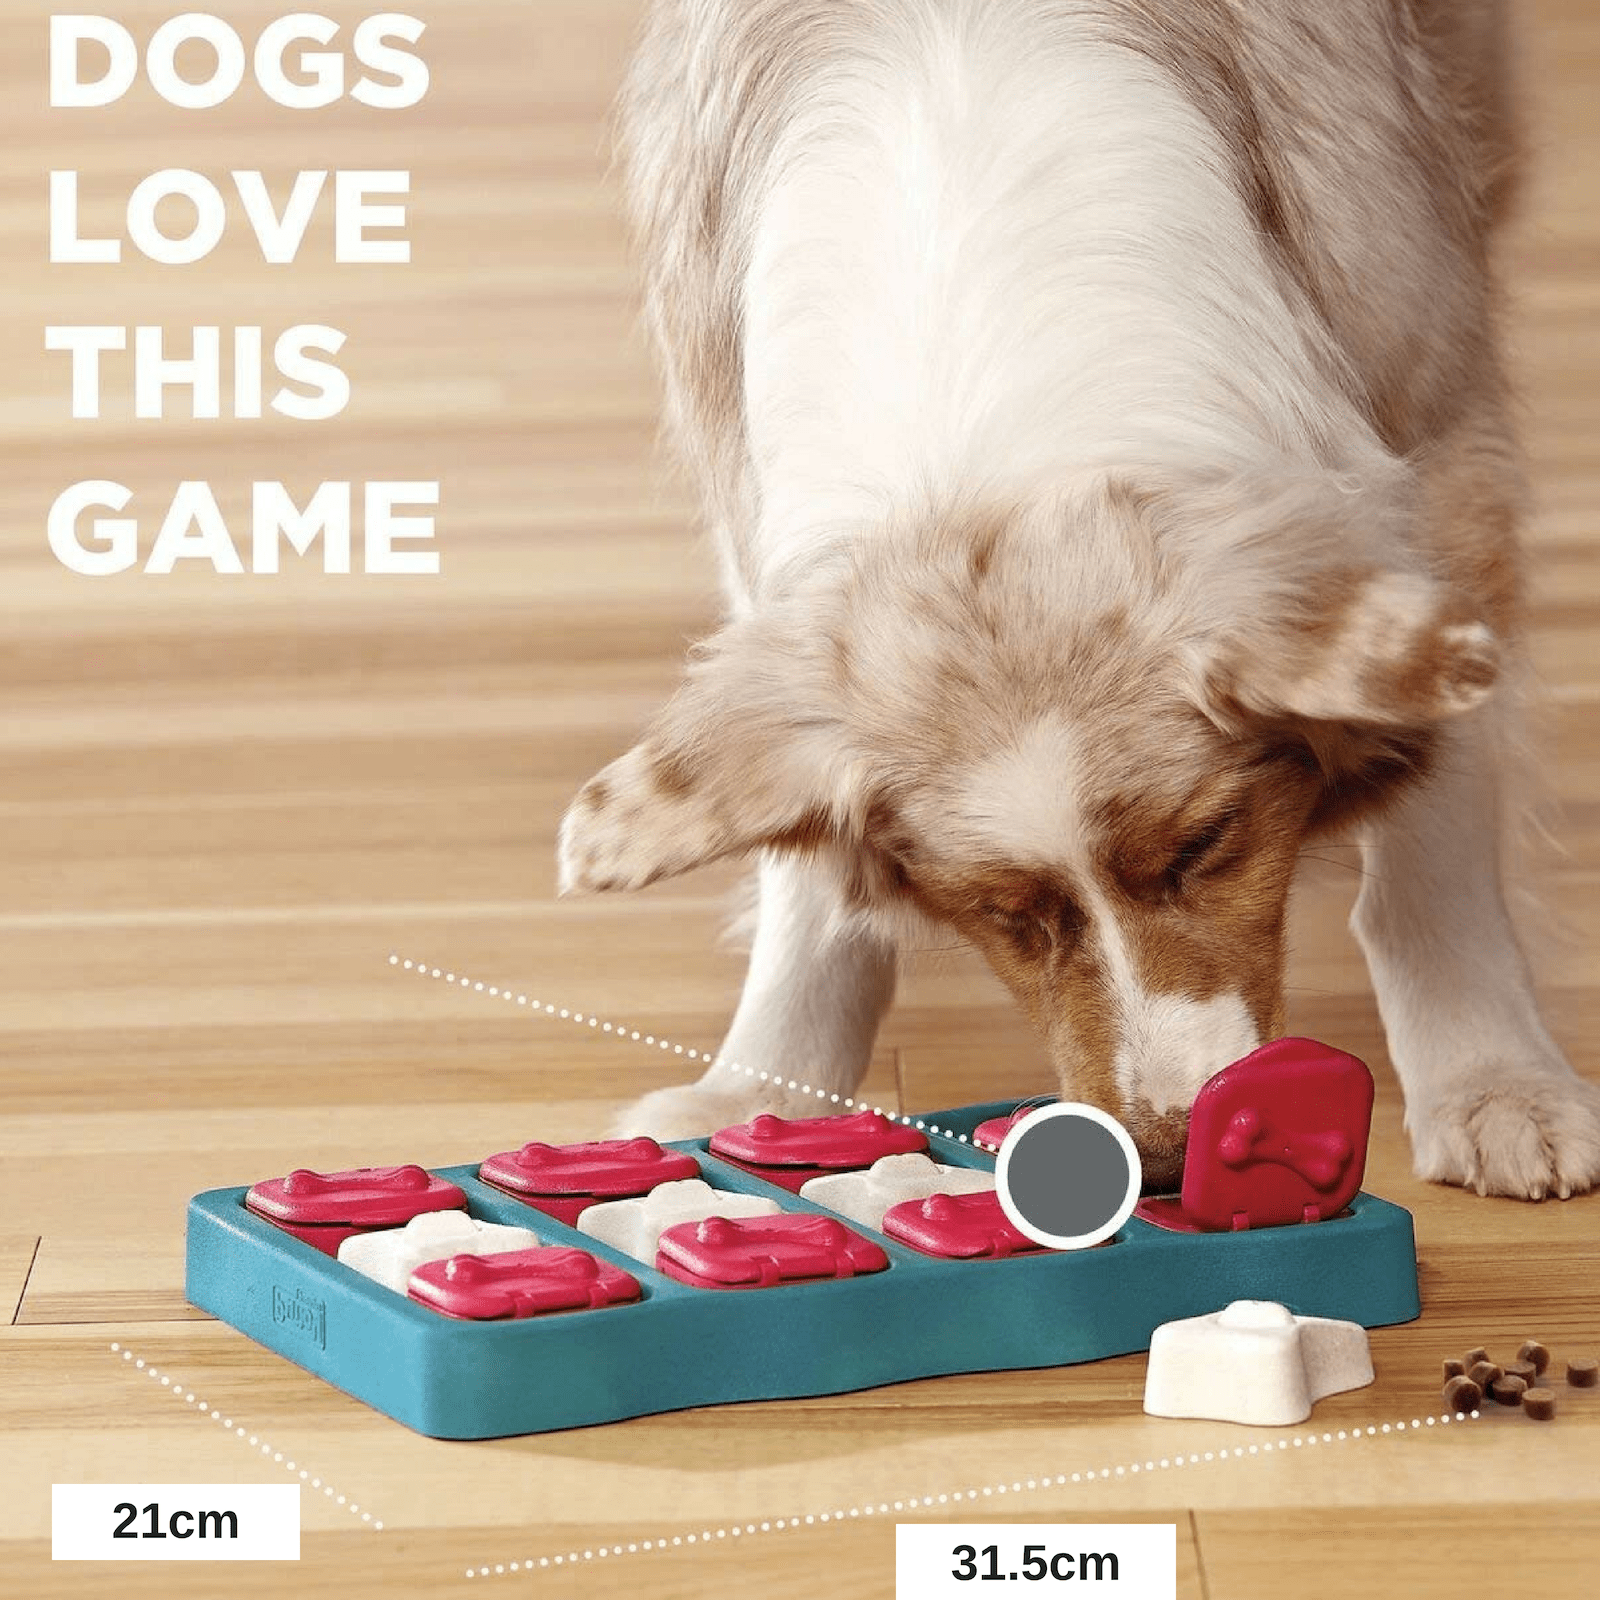 https://cdn.shopify.com/s/files/1/1733/0973/products/outward-hound-dog-toy-nina-ottosson-dog-puzzle-toy-interactive-treat-dispenser-dog-brick-31857686380743.png?v=1635181740